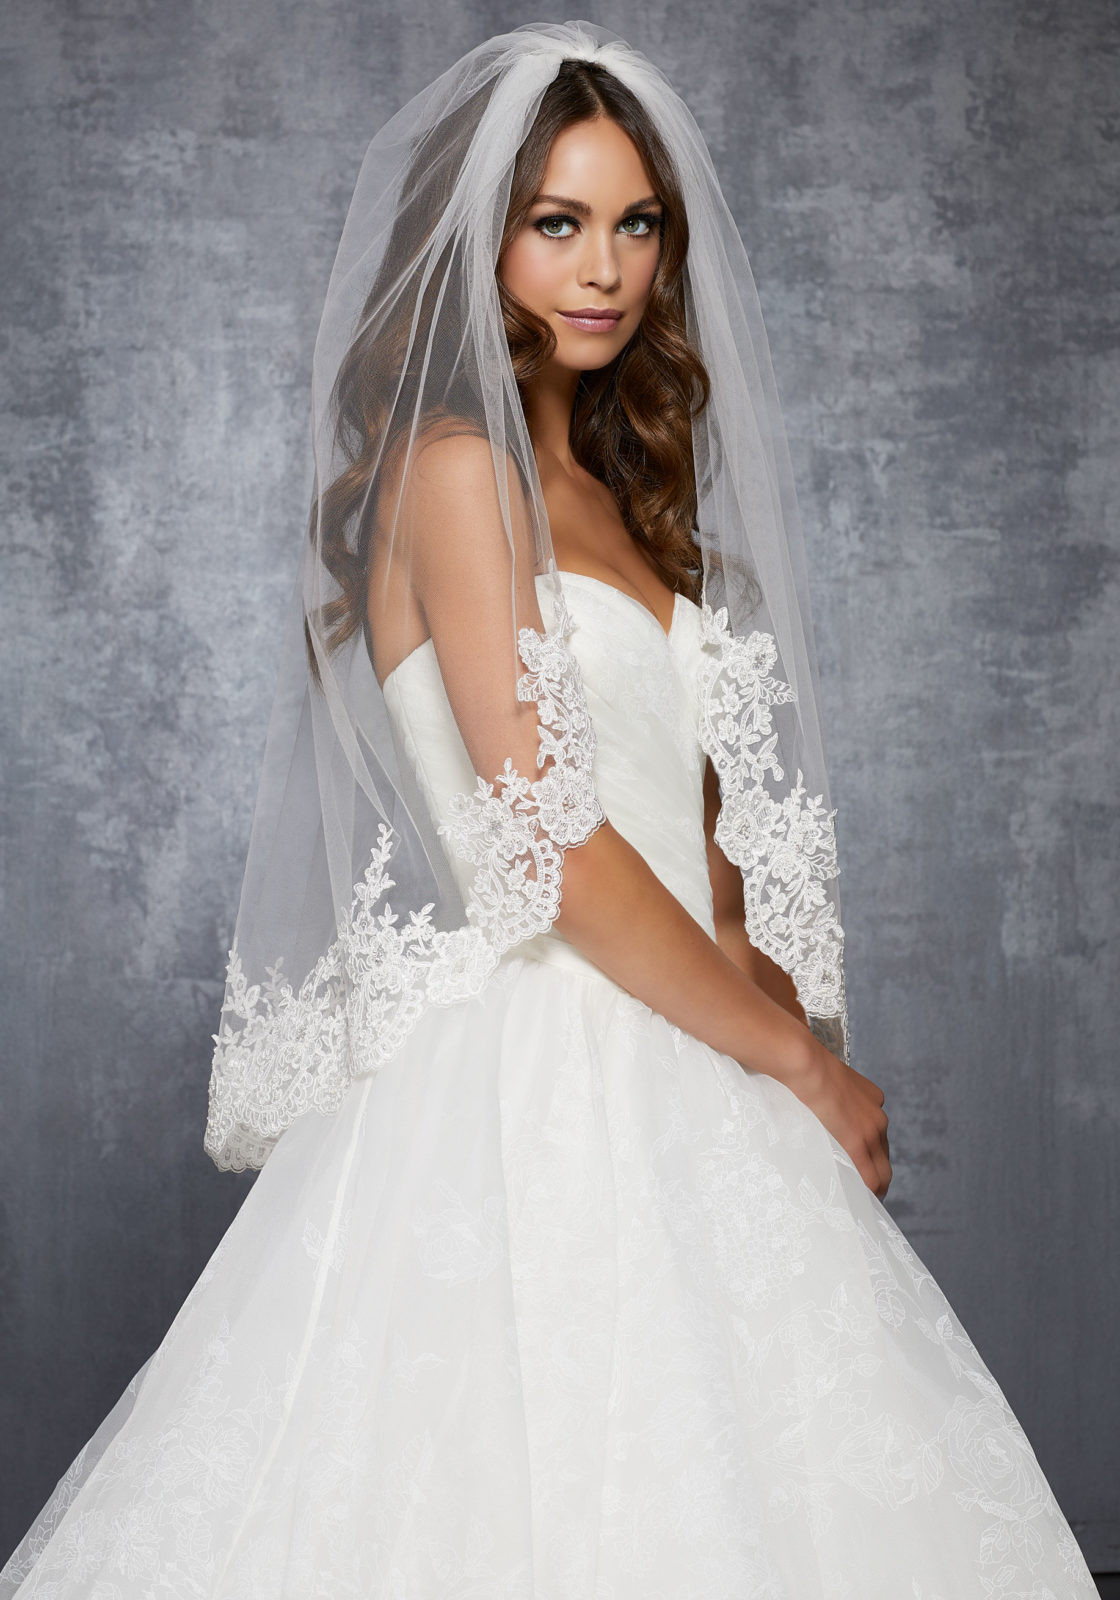 Wedding Dresses With Veils
 Veil with Lace Beaded with Sequins and Rhinestones